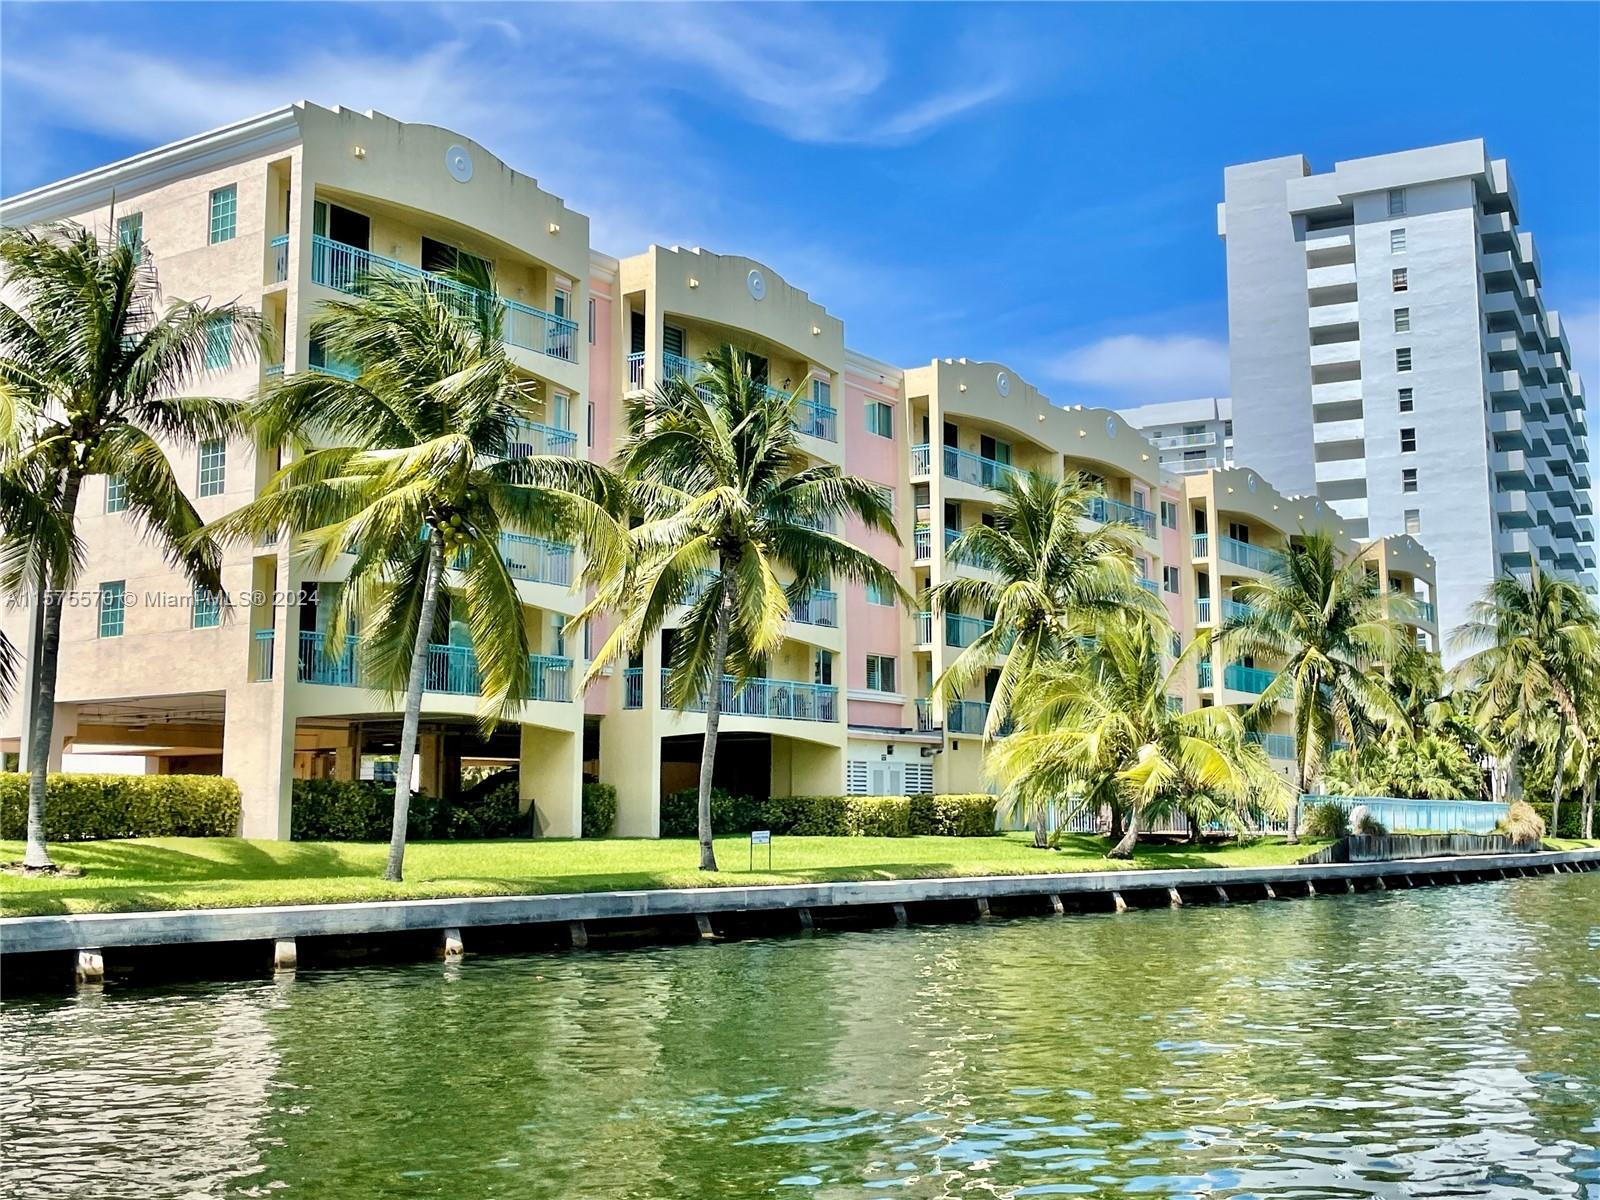 Waterfront boutique building, built in 2004 in Hallandale Beach, only 44 units. Spacious, cozy, remo